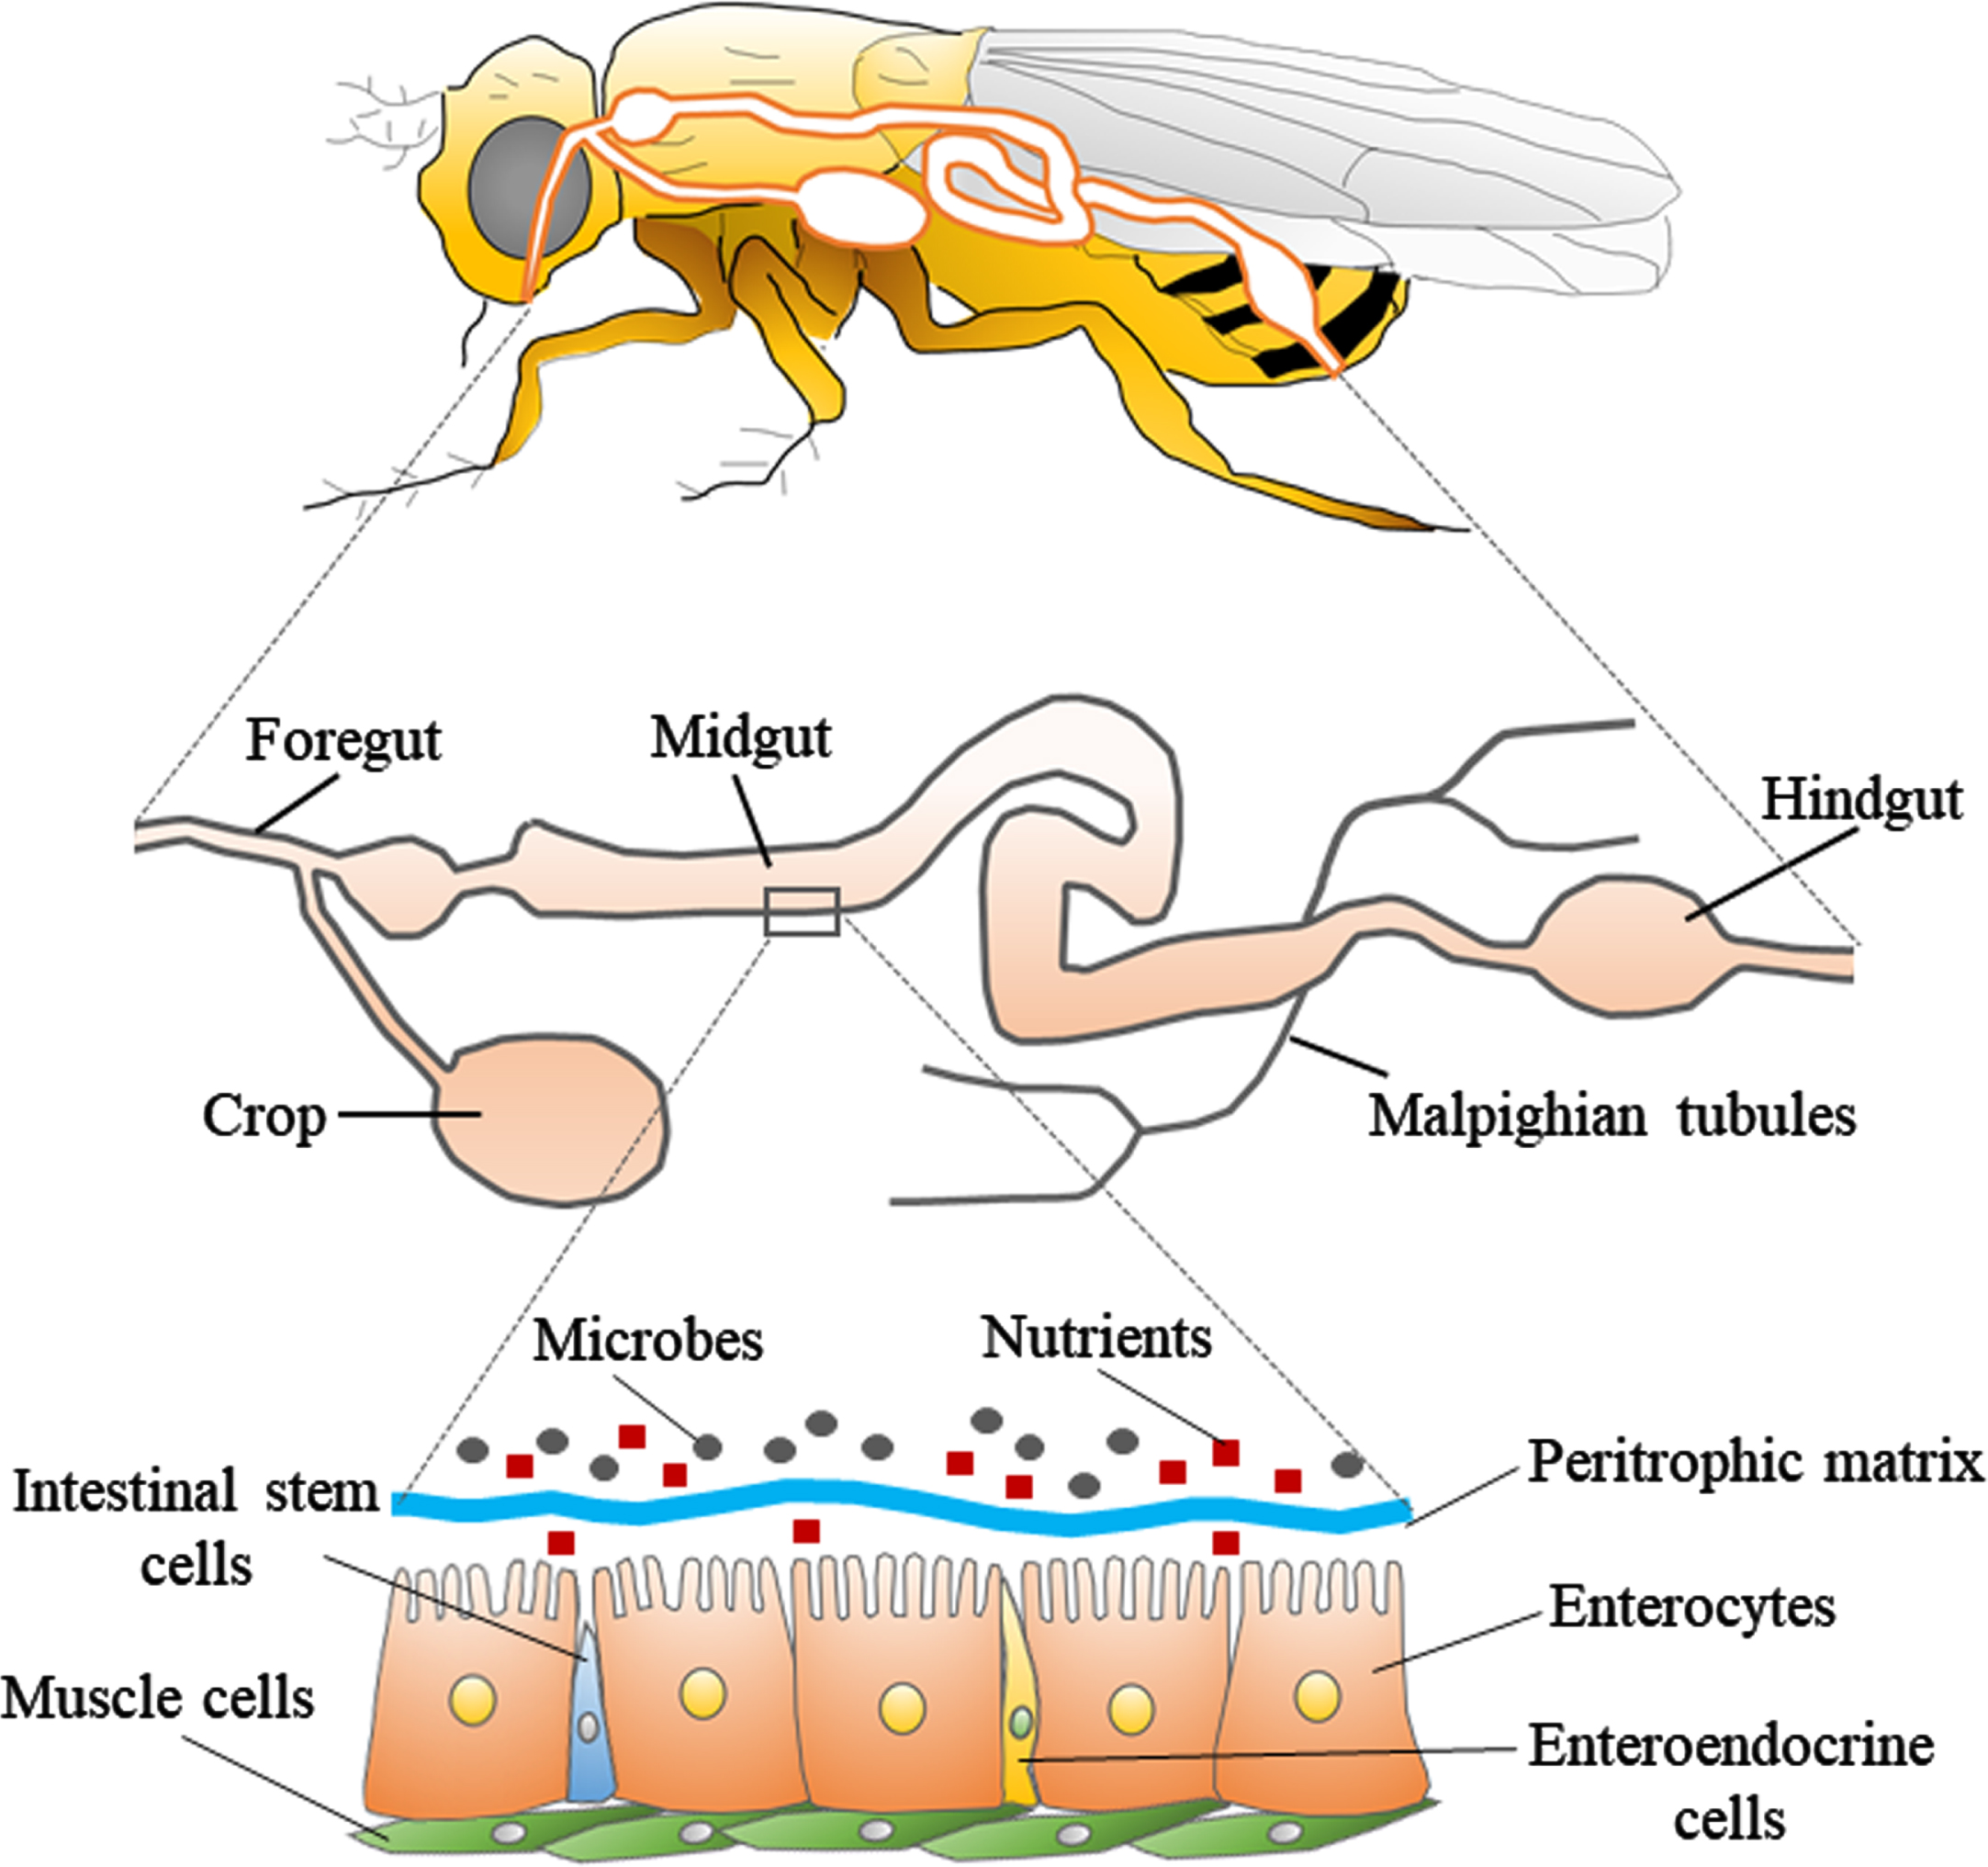 Structure of the digestive tract in Drosophila. The upper panel shows a schematic diagram of the body and digestive tract of Drosophila. The middle panel shows the general parts of the digestive tract, which is divided into three parts: foregut, midgut, and hindgut. The lower panel shows the fine structure of a portion of the midgut. The layer consisting of enterocytes, enteroendocrine cells, and intestinal stem cells is covered with muscle cells. There is a peritrophic matrix between the enterocytes and the microbes, which physically separates the enterocytes from the microbes.